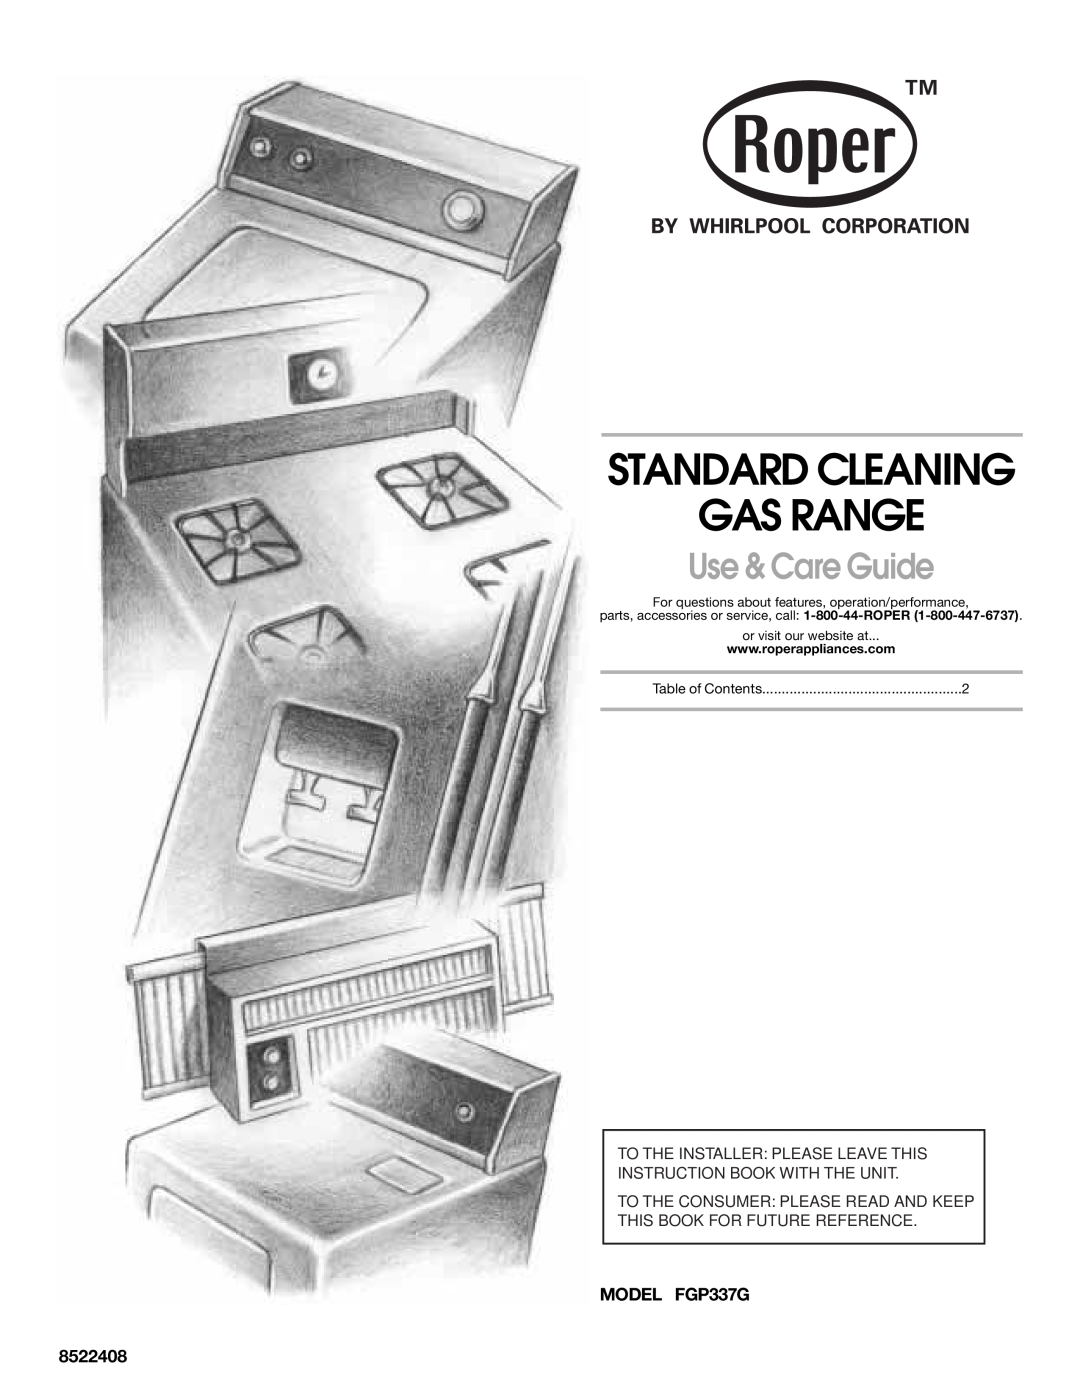 Whirlpool FGP337G manual Standard Cleaning Gas Range, Use & Care Guide, parts, accessories or service, call 1-800-44-ROPER 